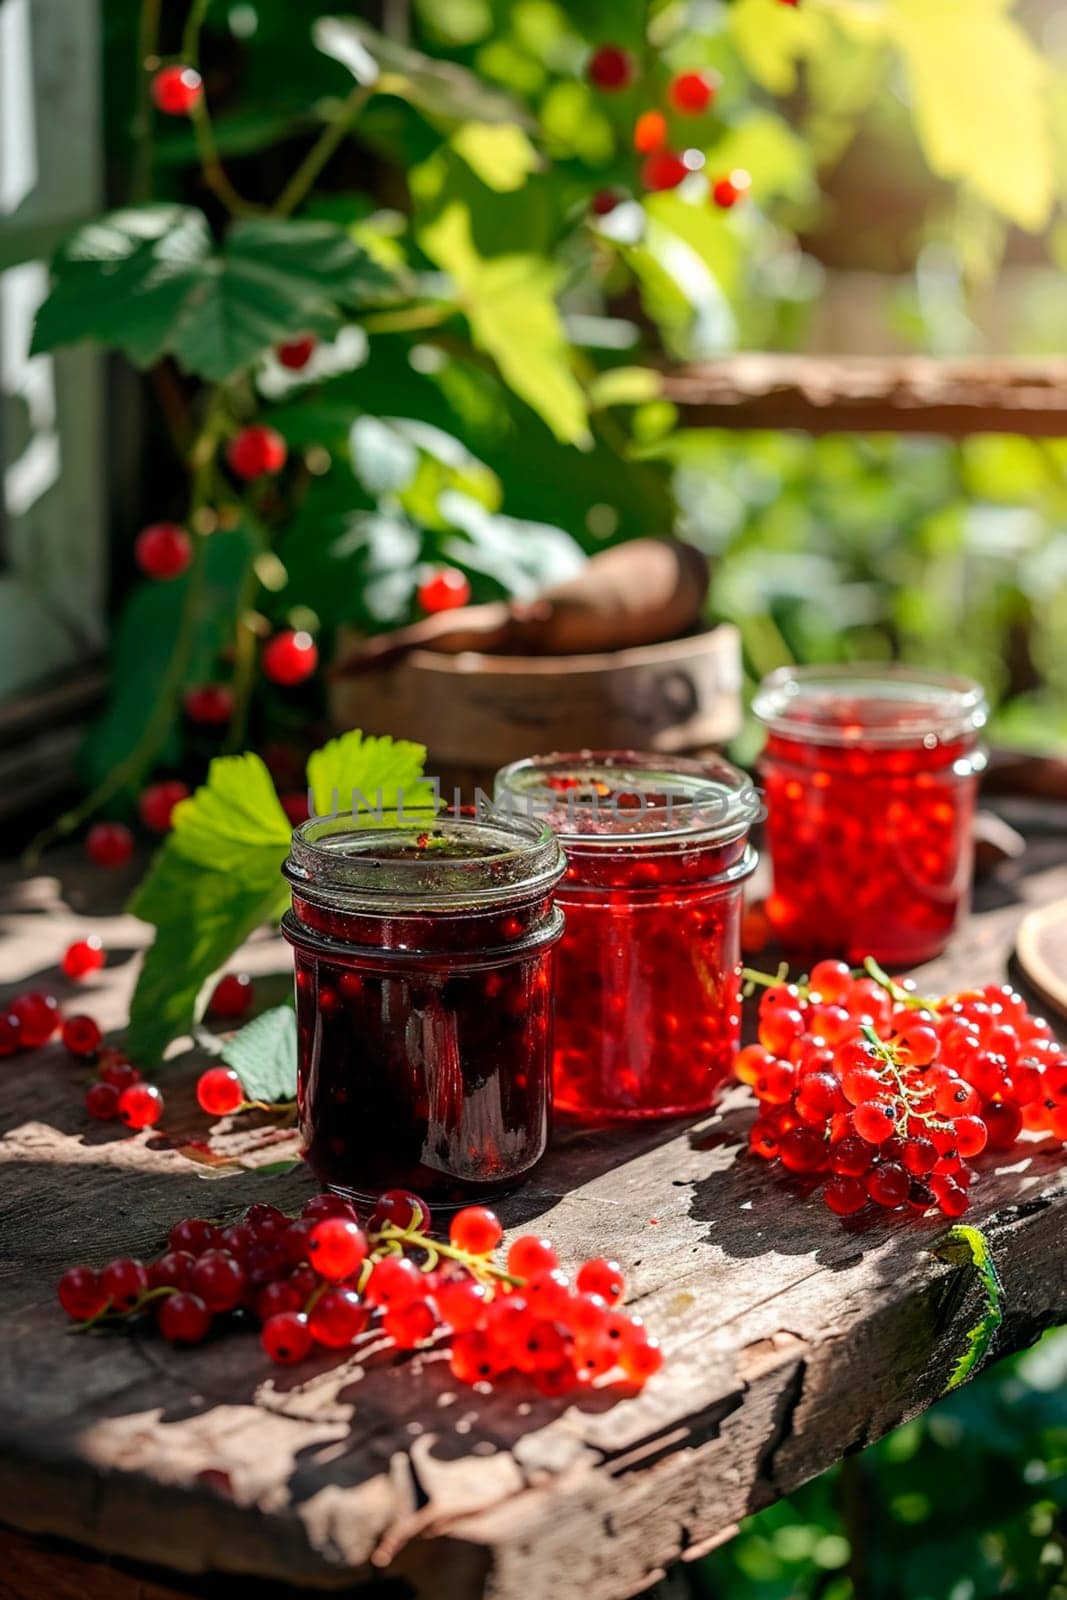 red currant jam in a jar. Selective focus. by yanadjana